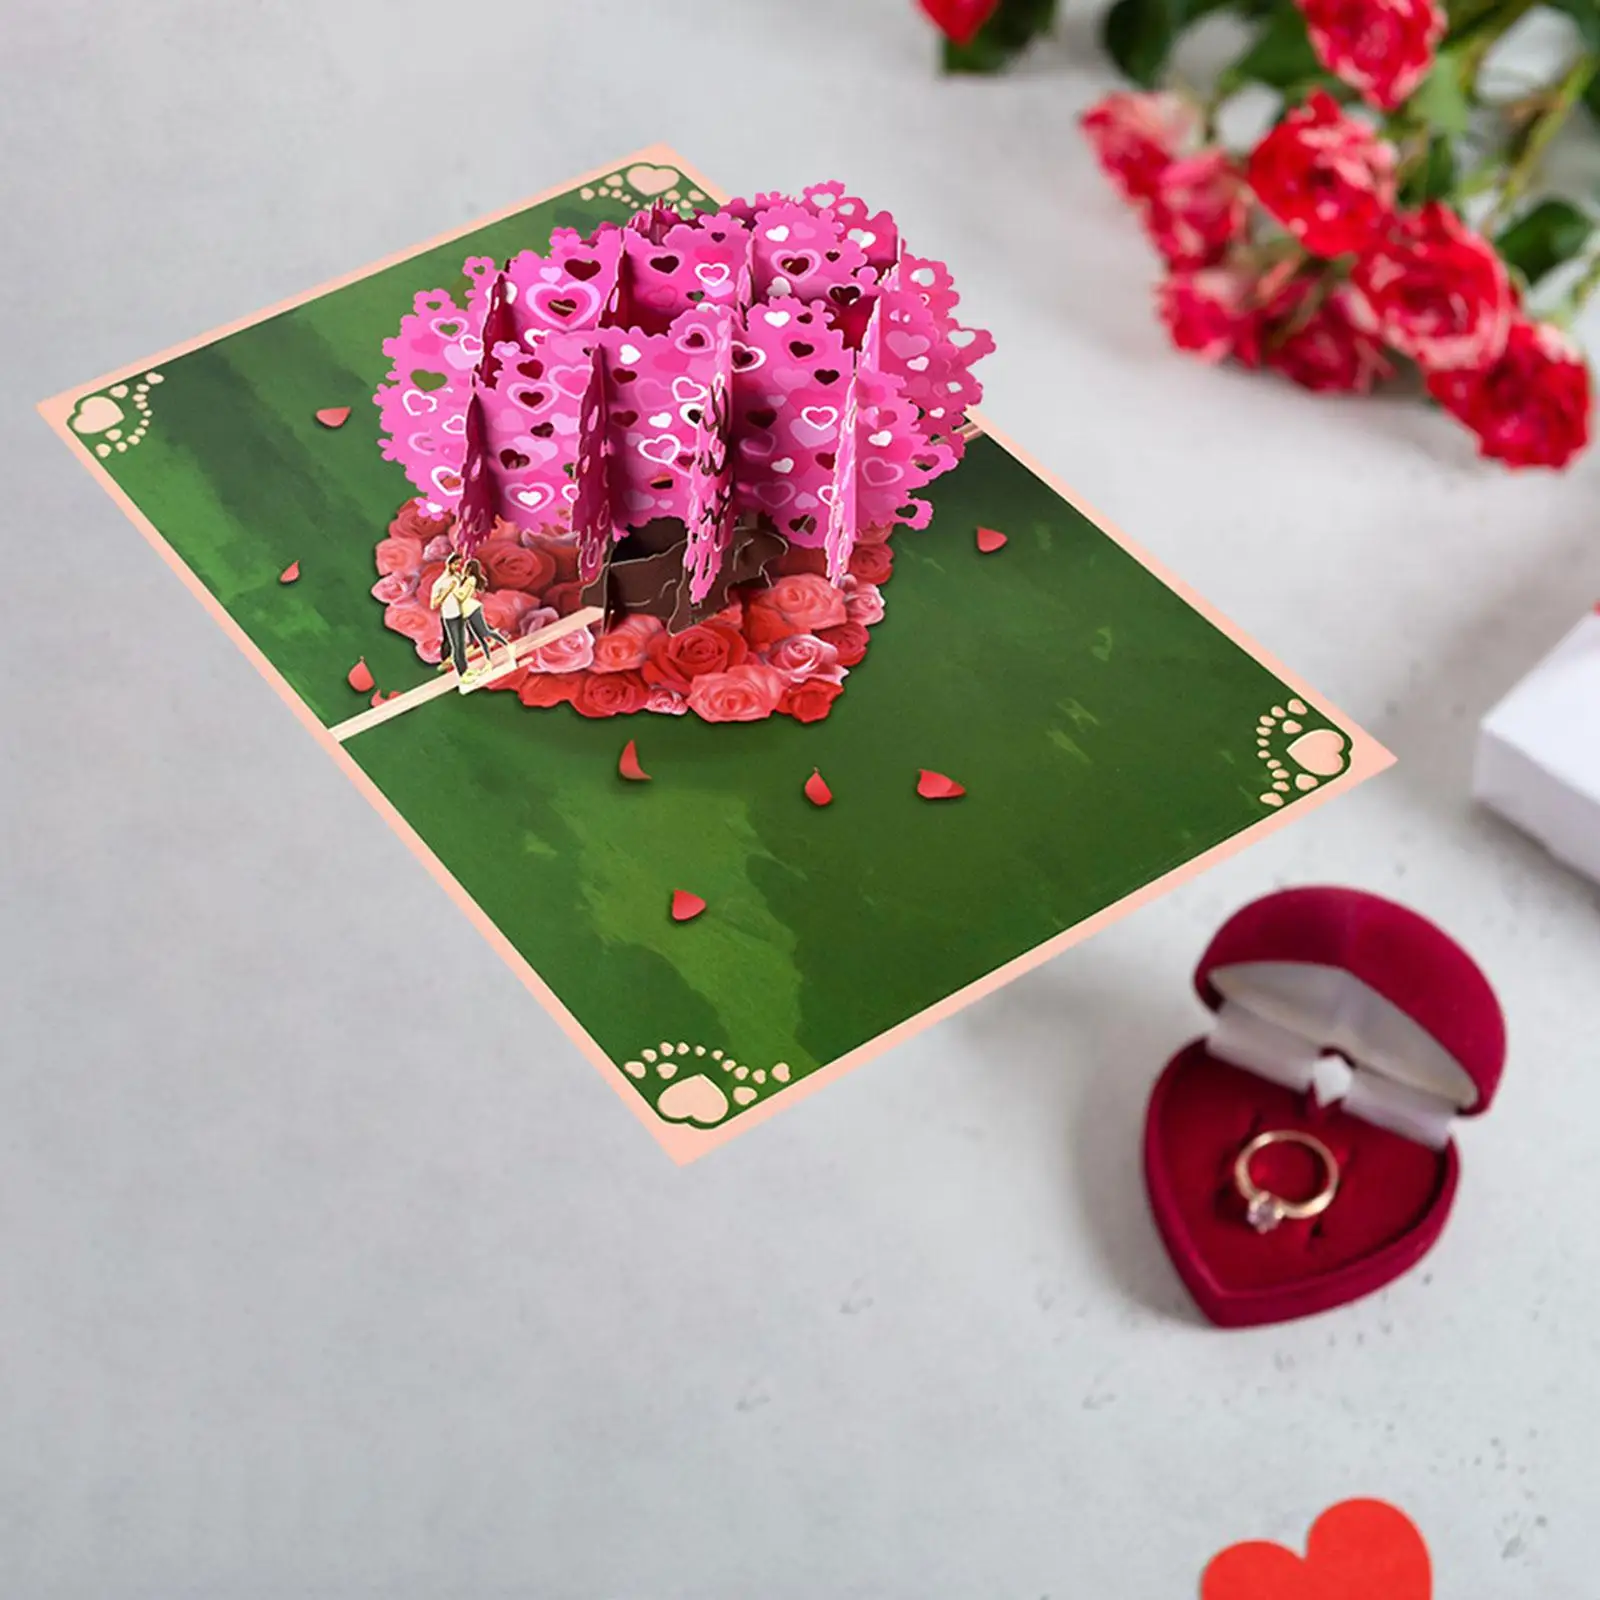 Valentines Day Cards Valentines Day Gifts Invitations Card 3D Holiday Card for Male Female Him Her Friends Celebration Wedding